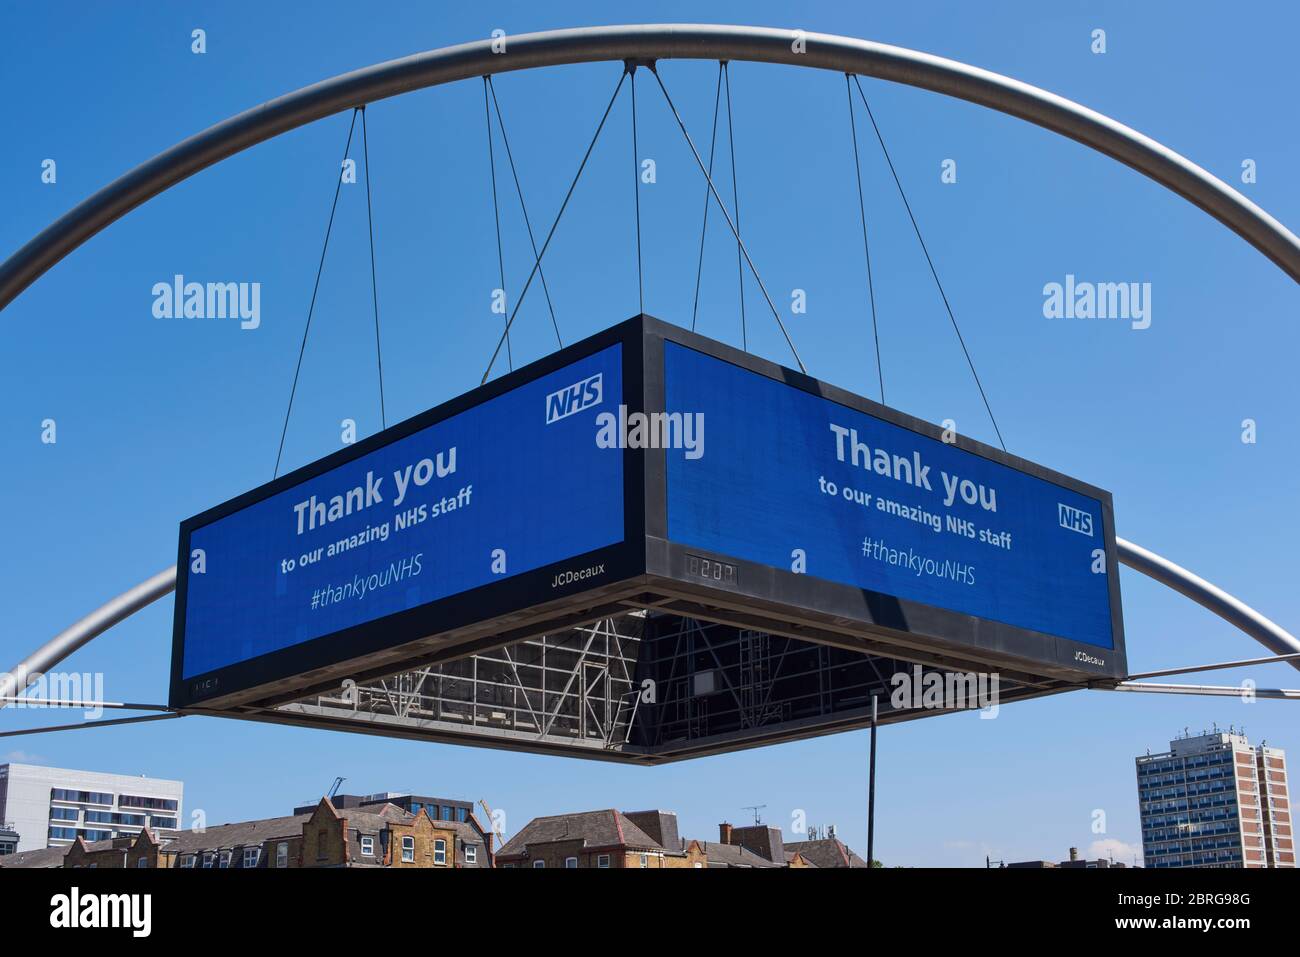 Advertising display at Old Street Roundabout, Shoreditich, East London UK, giving a vote of thanks to the NHS during the Coronavirus crisis Stock Photo